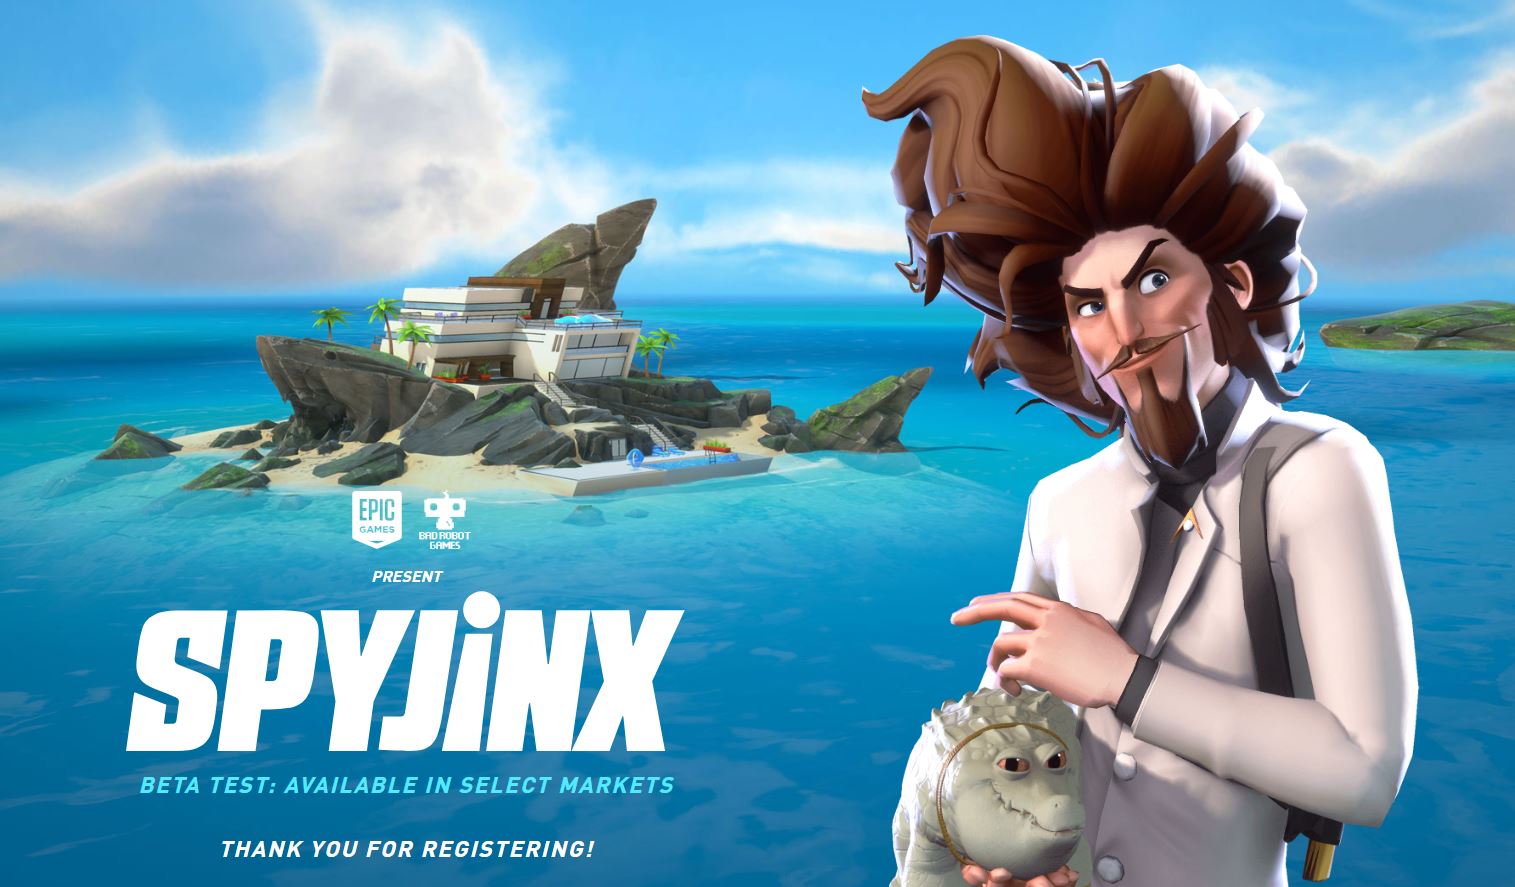 spynix from epic games